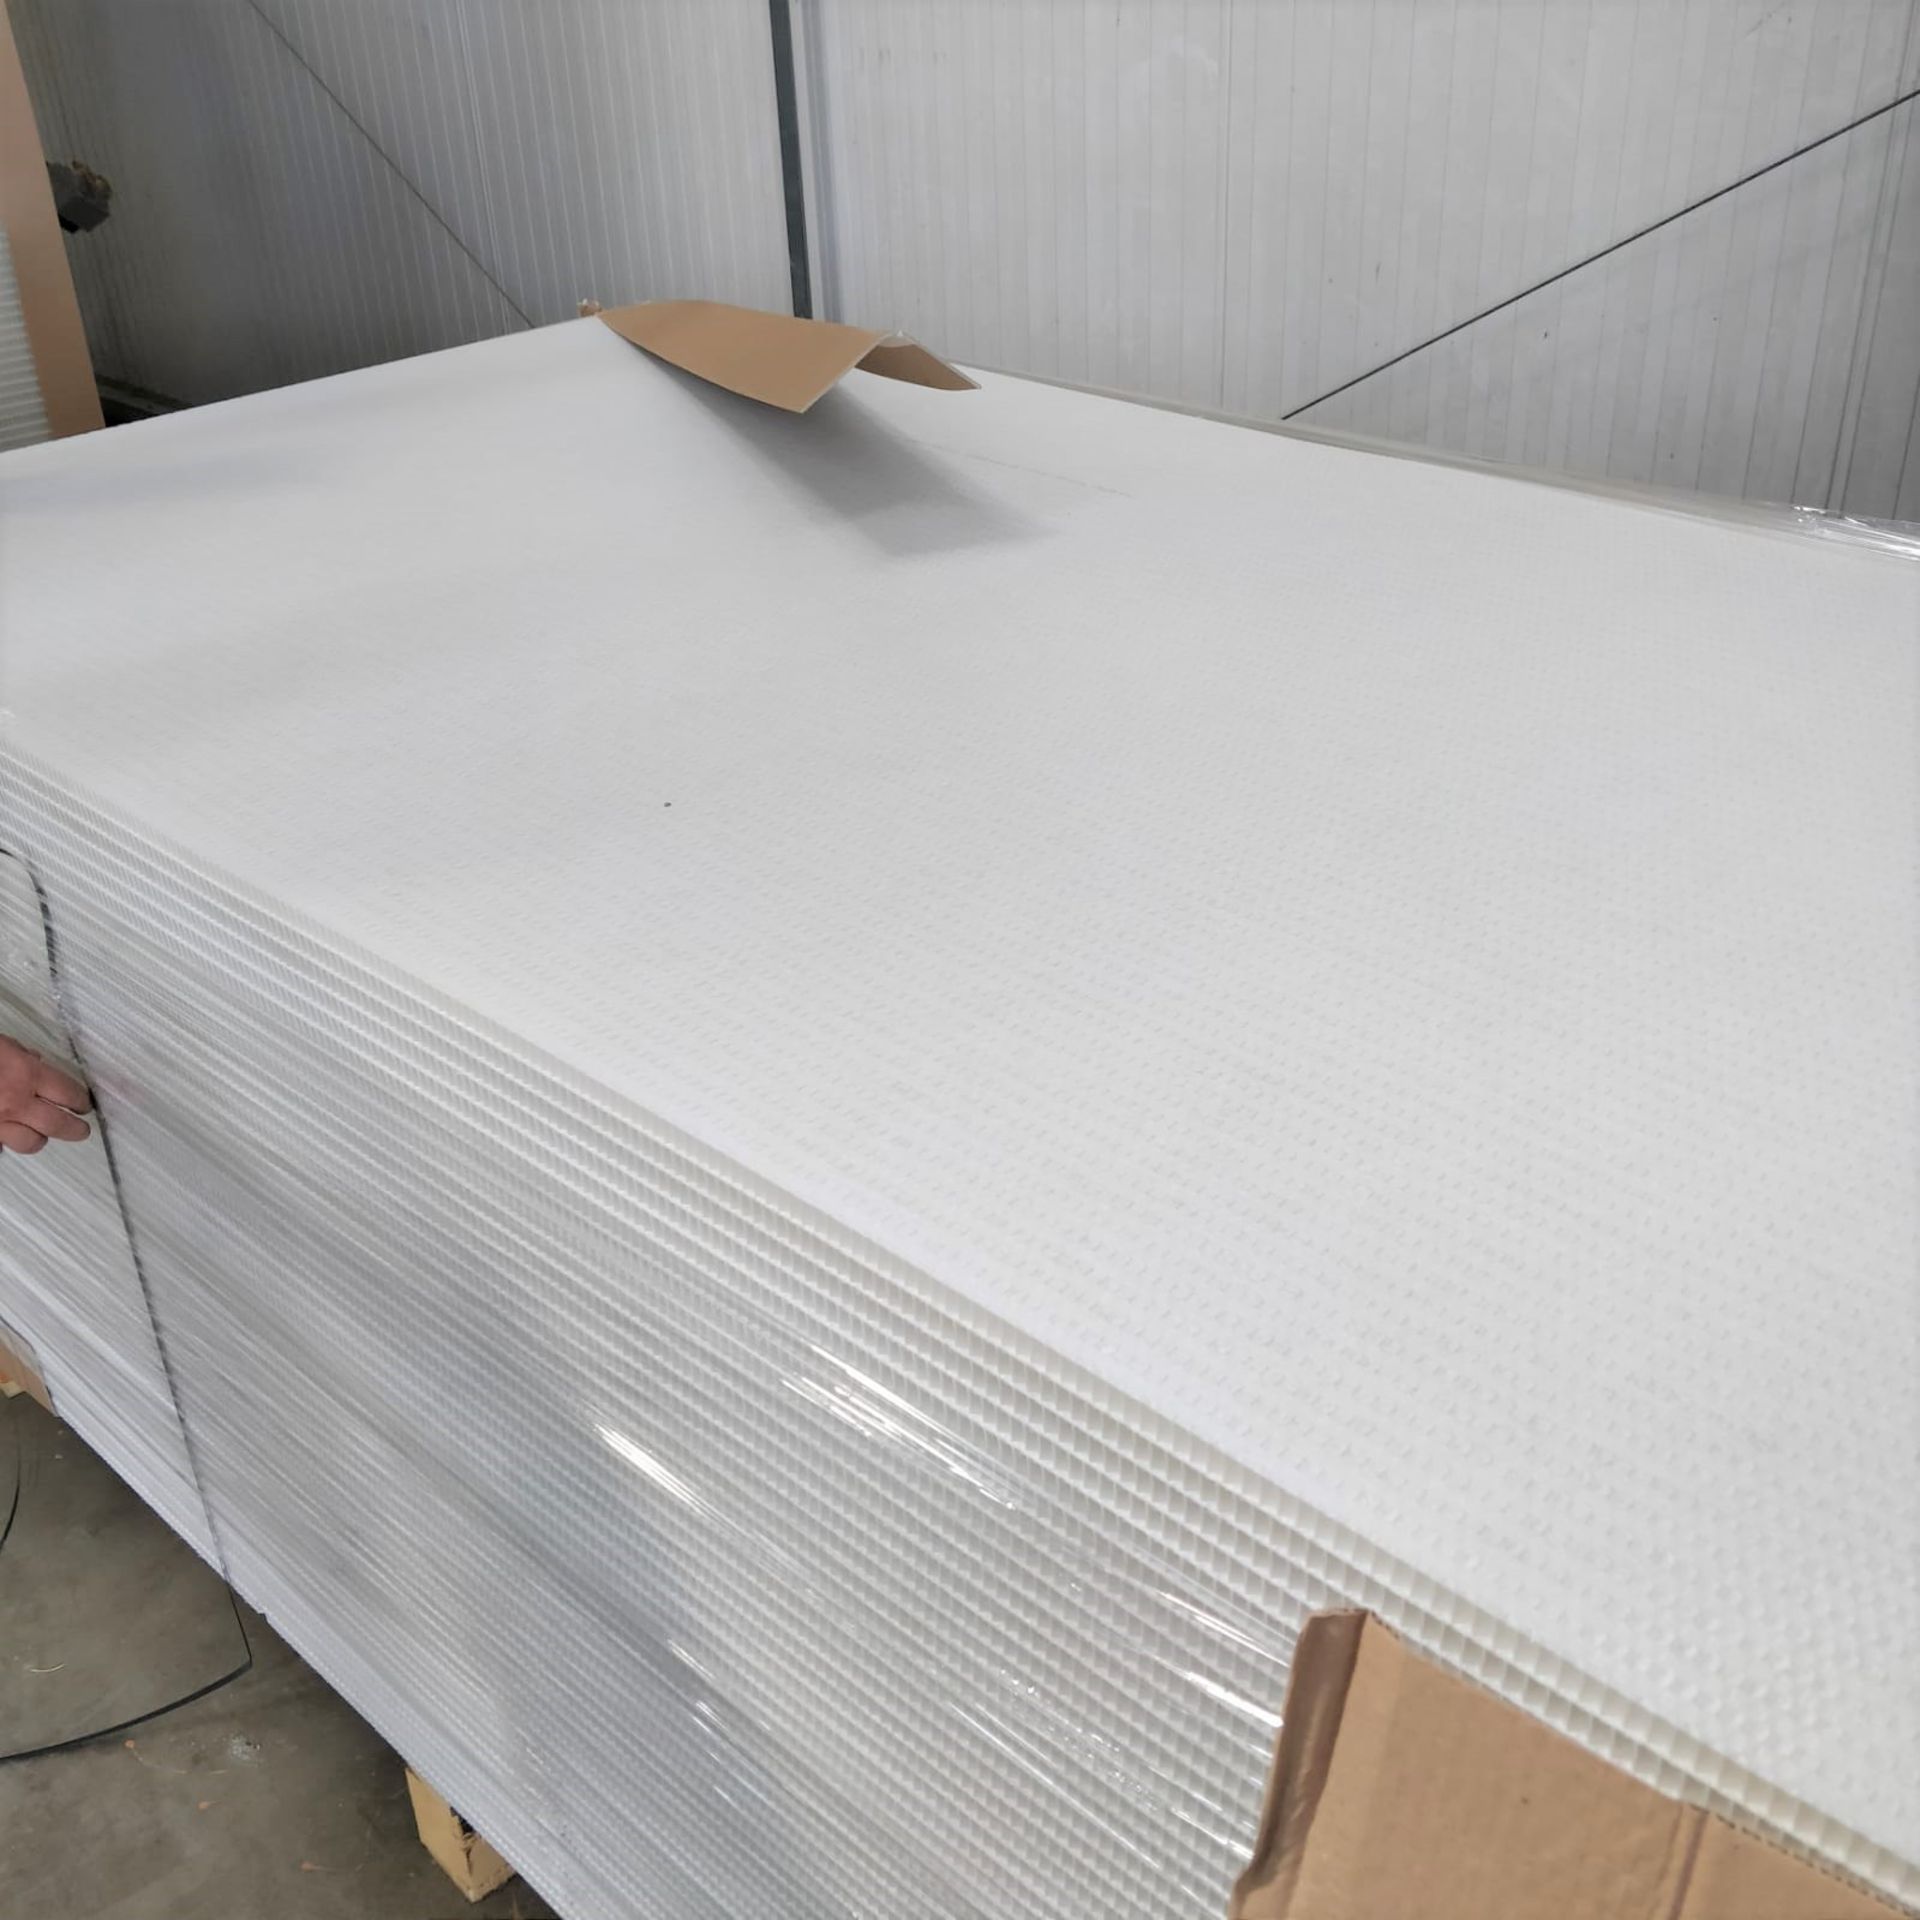 24 x ThermHex Thermoplastic Honeycomb Core Panels - Size Approx 2630 x 1210 x 18mm - New Stock - - Image 6 of 6